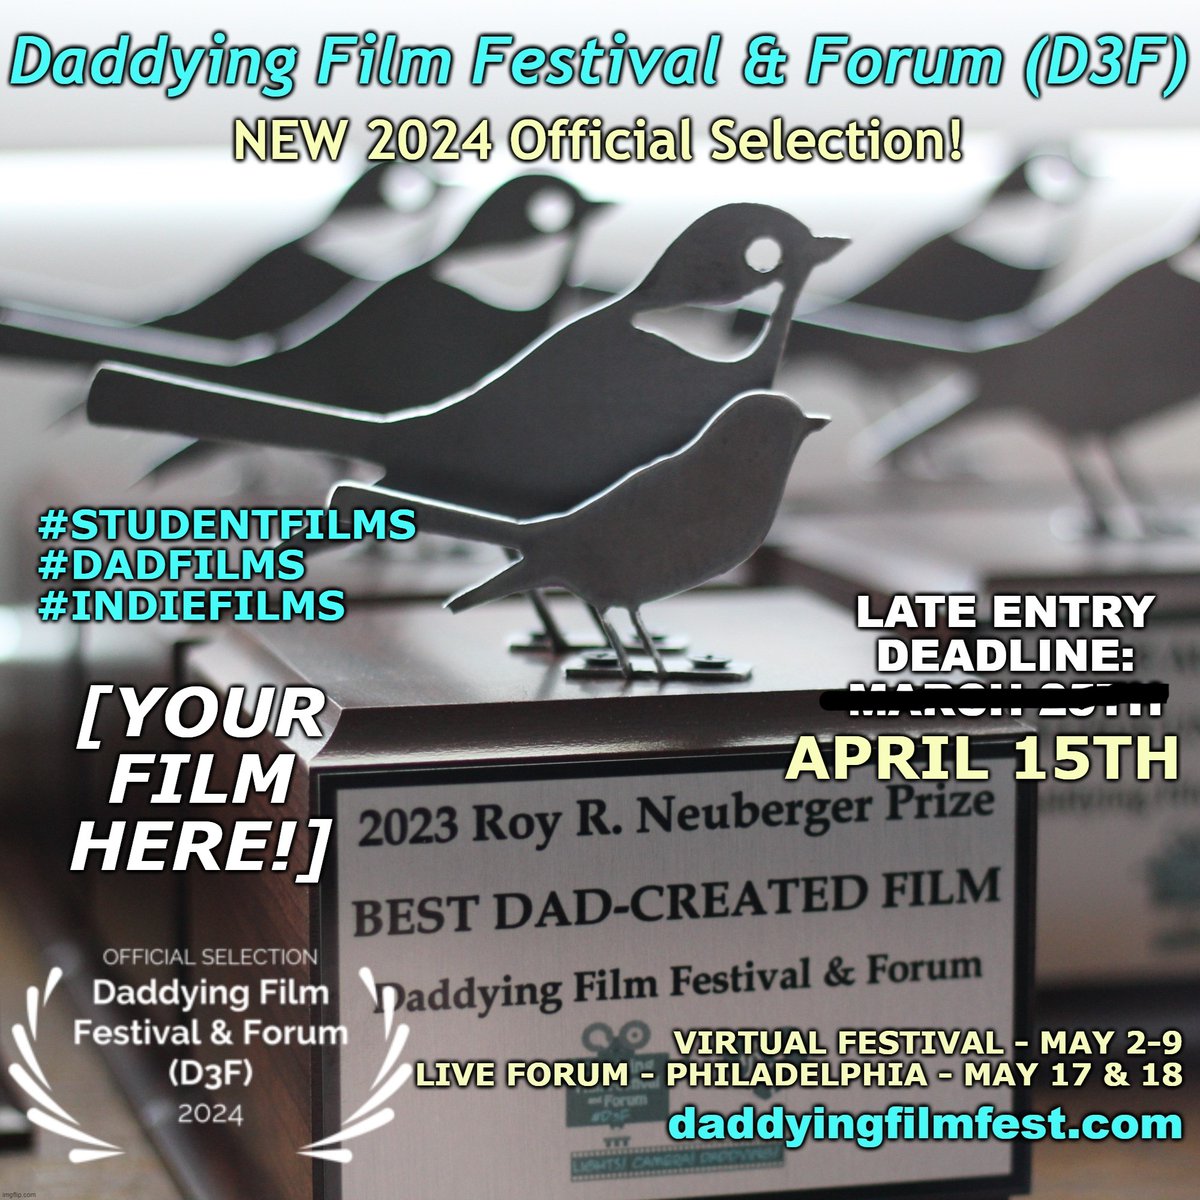 ENTRY DEADLINE ALERT: D3F entry deadline is MONDAY, APRIL 15! Plenty of time for students, Dads/Dad figs & indies to submit on FilmFreeway:
filmfreeway.com/DaddyingFilmFe…

#filmfestival #callforsubmissions @equimundo_org @Fathersincorp @HSFilmFest @ParentCamp @homedadnet @ArtEddy3 @GPFO